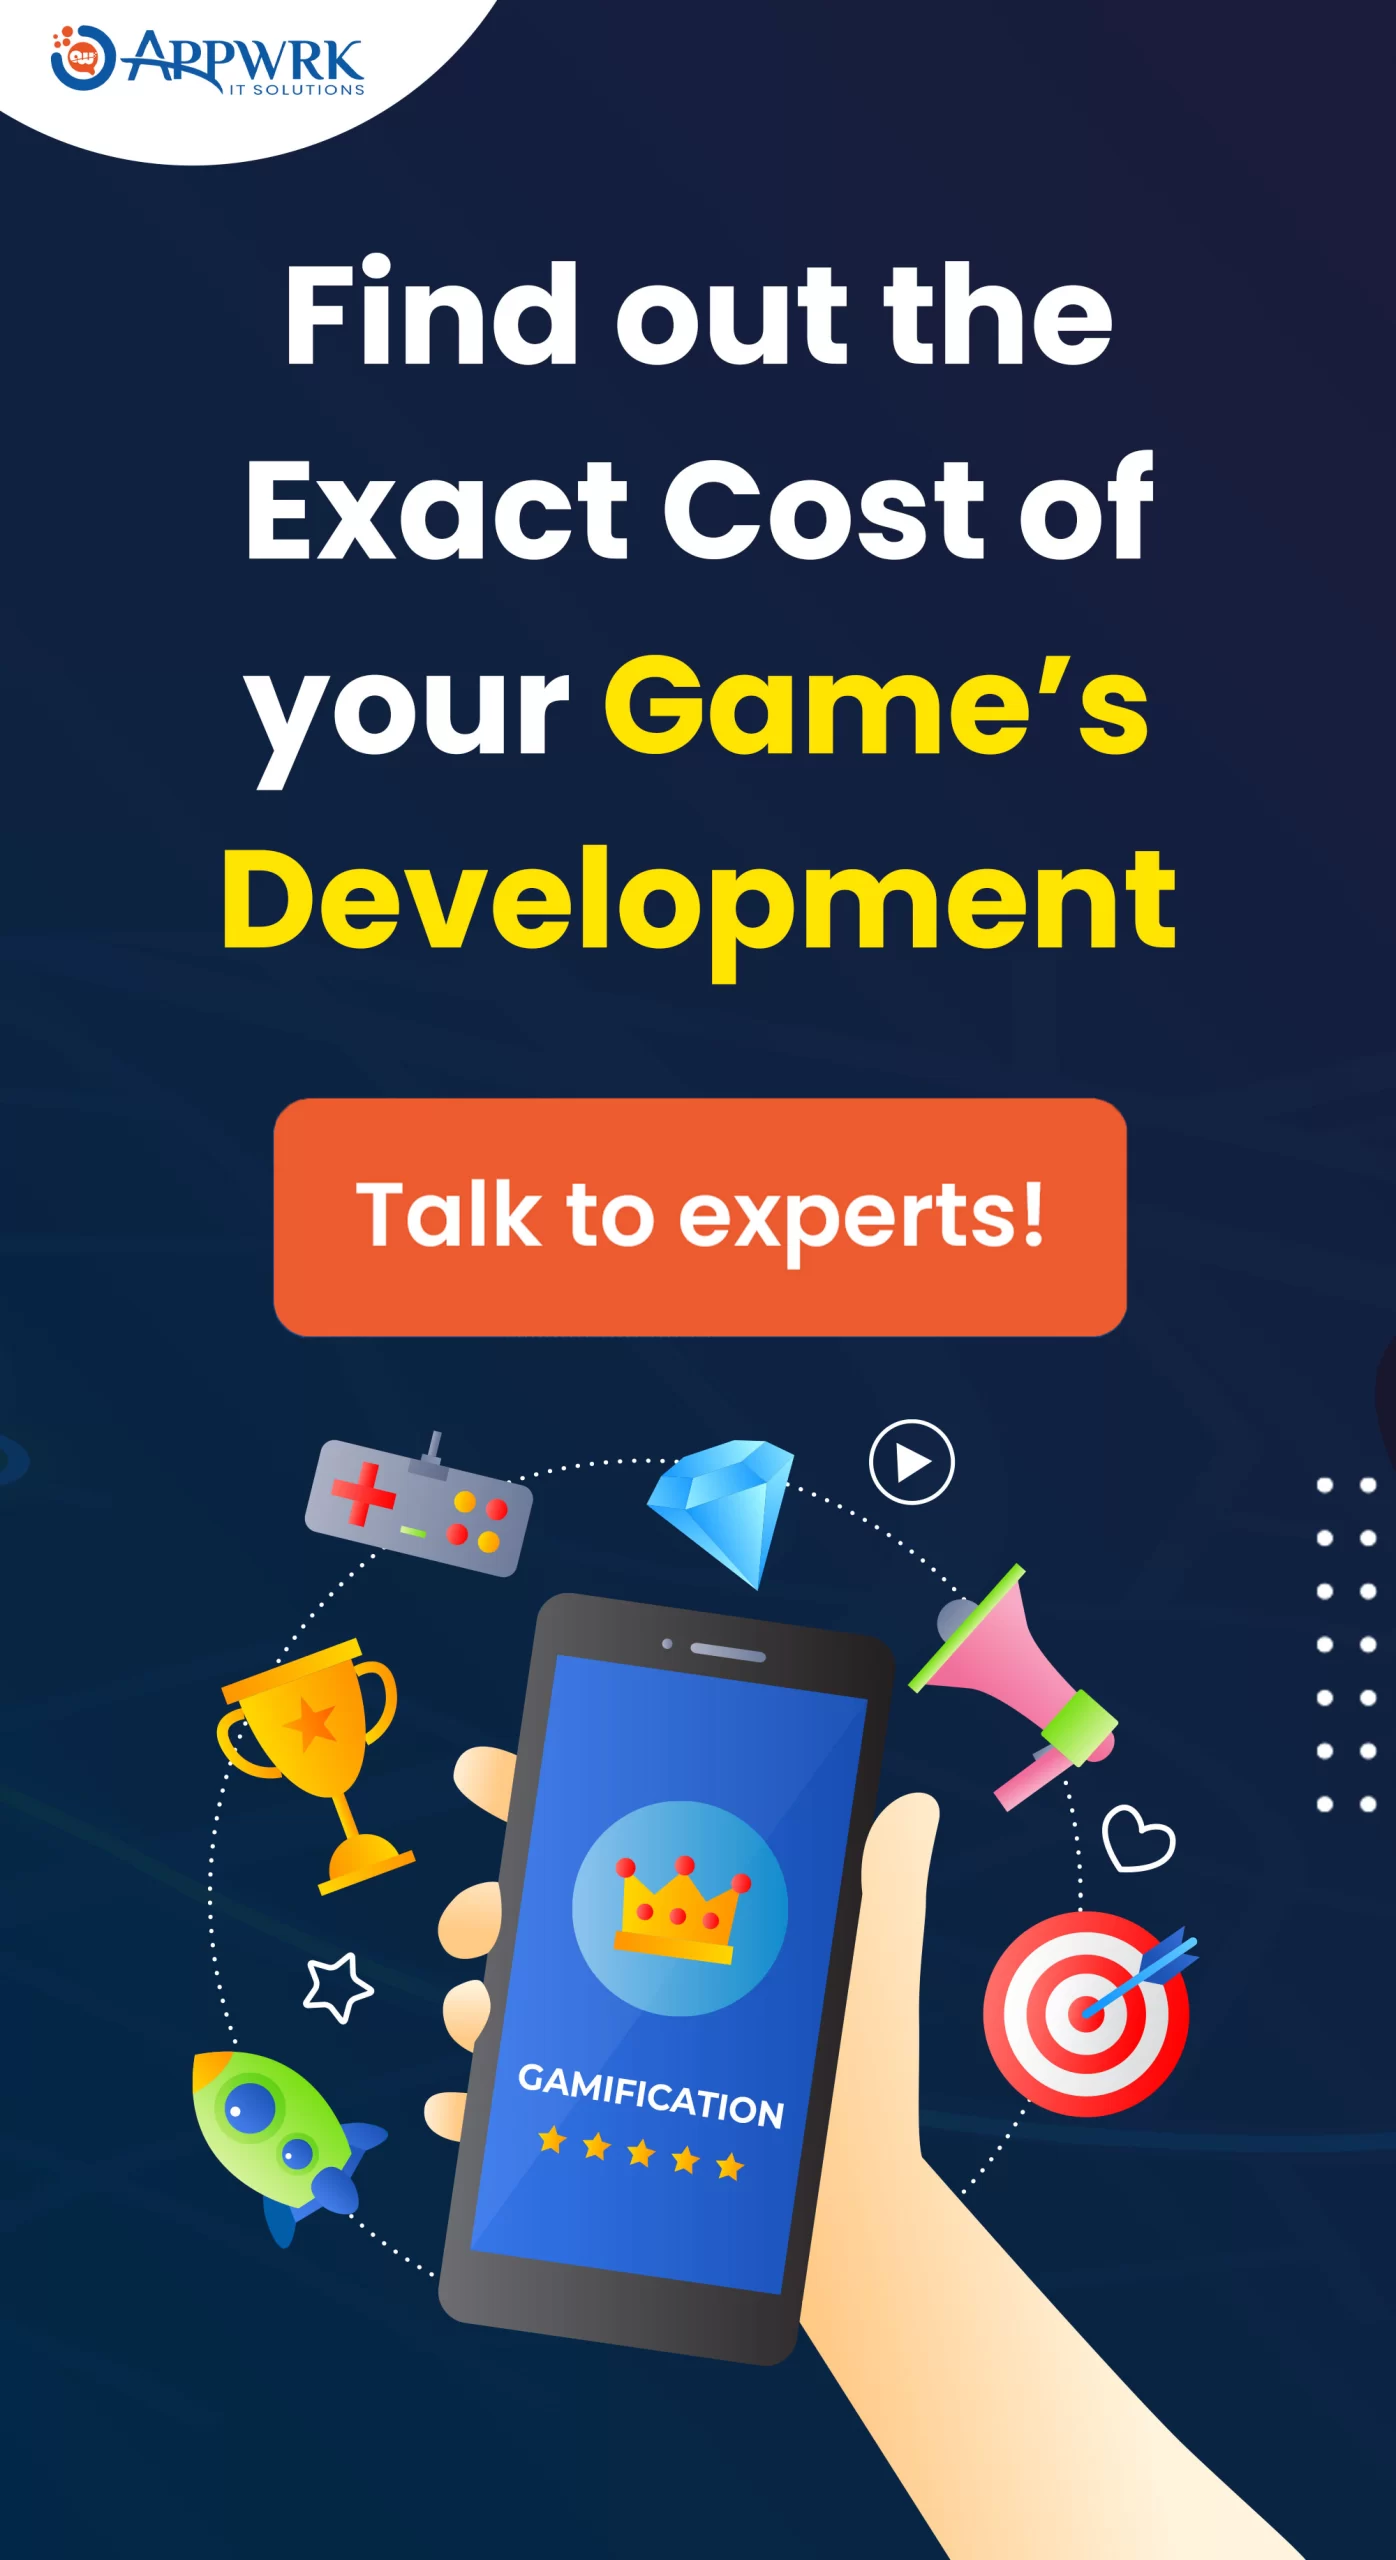 Mobile Game App Development Guide: Features, Costs, Trends